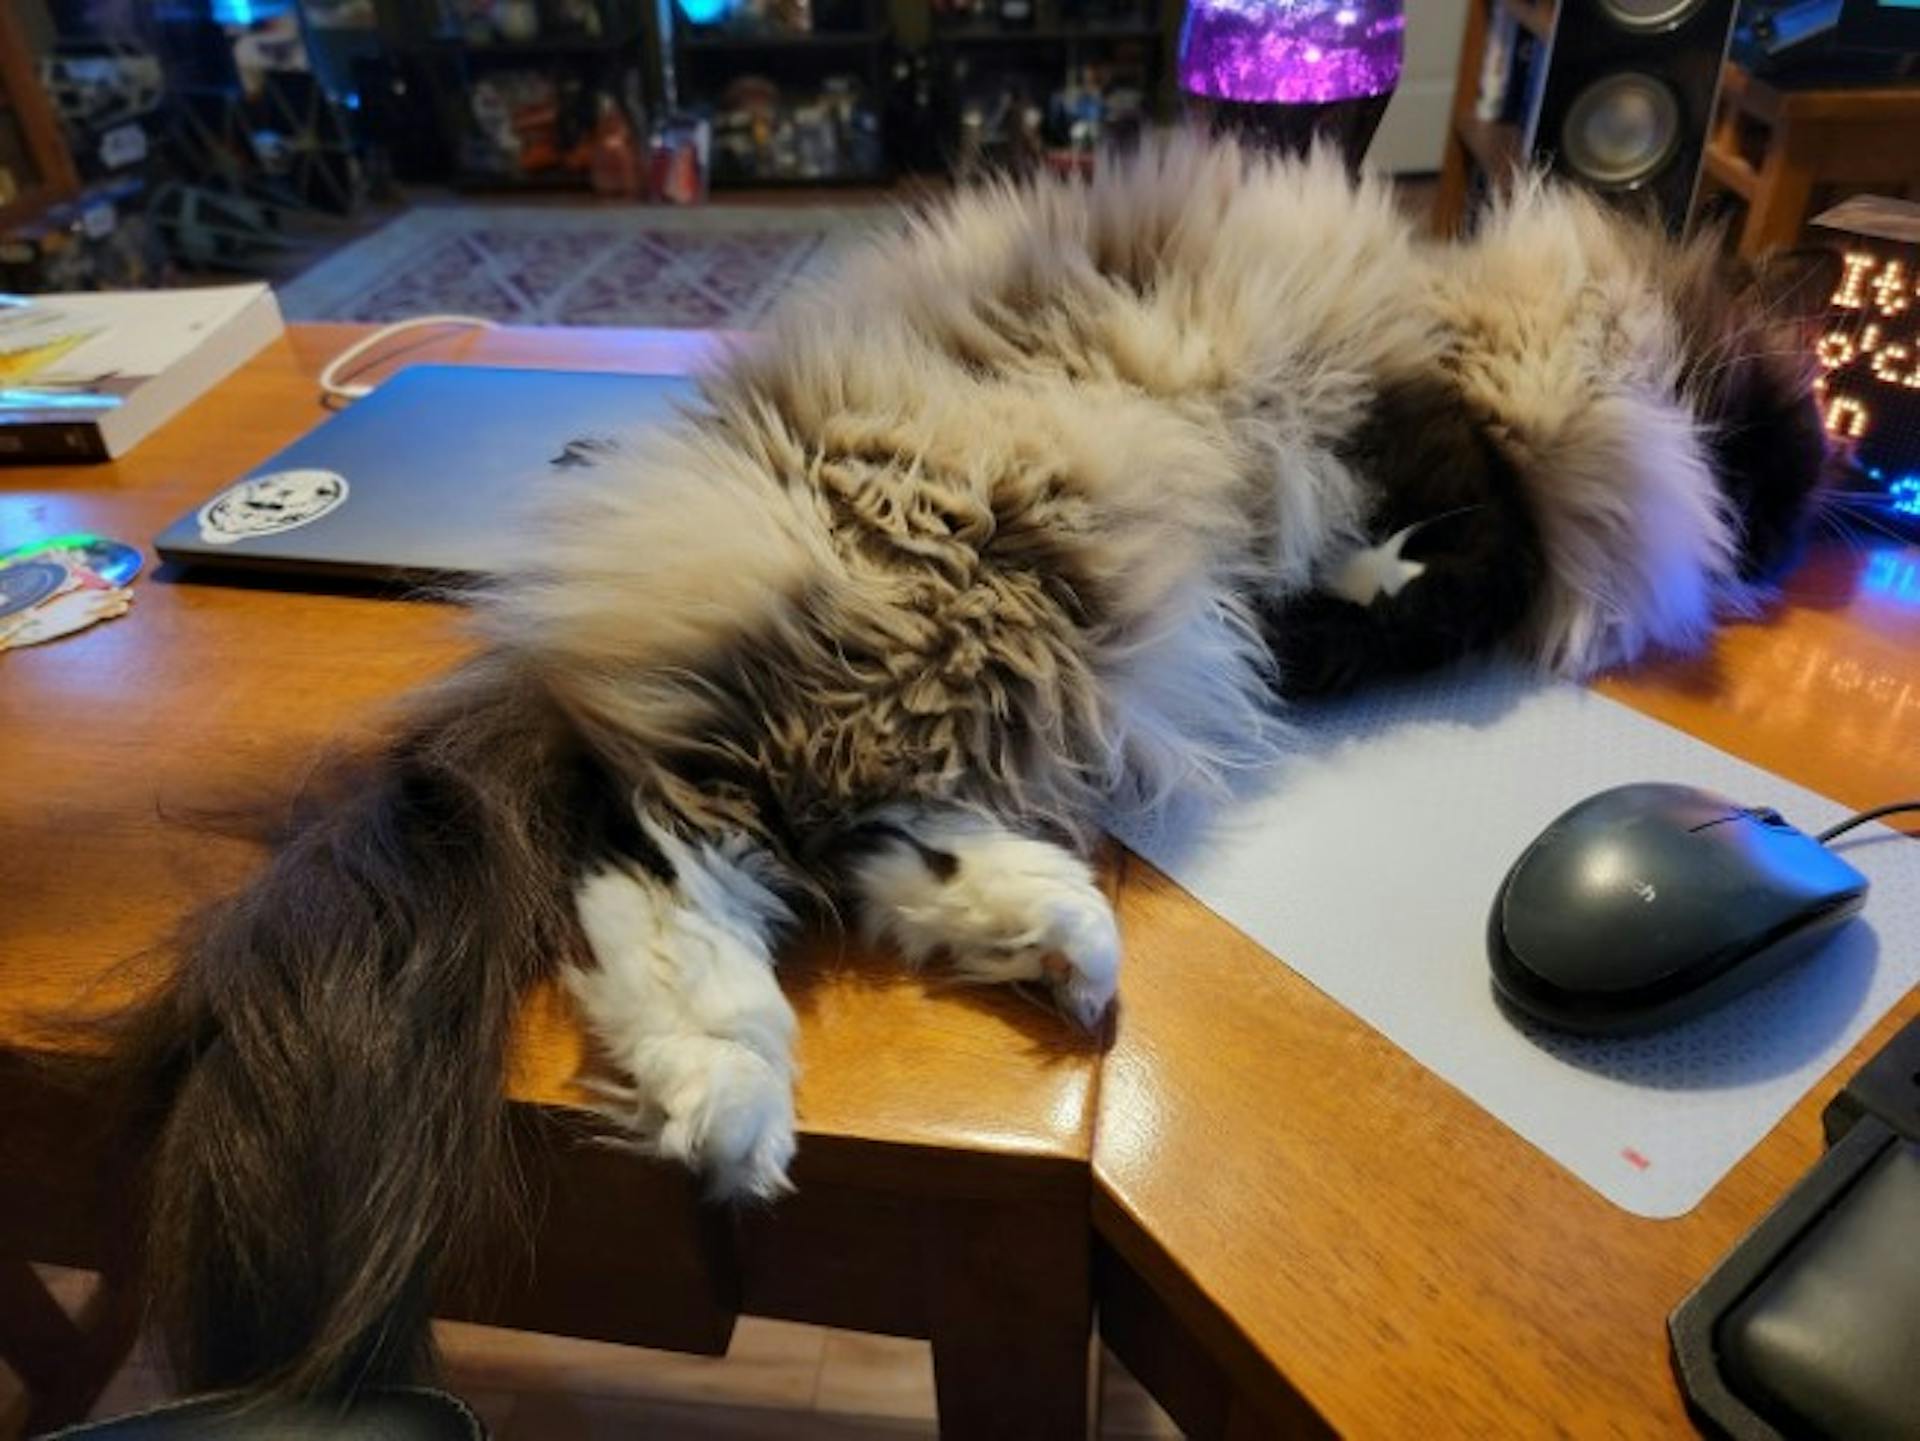 Cat lying on a desk next to a computer mouse